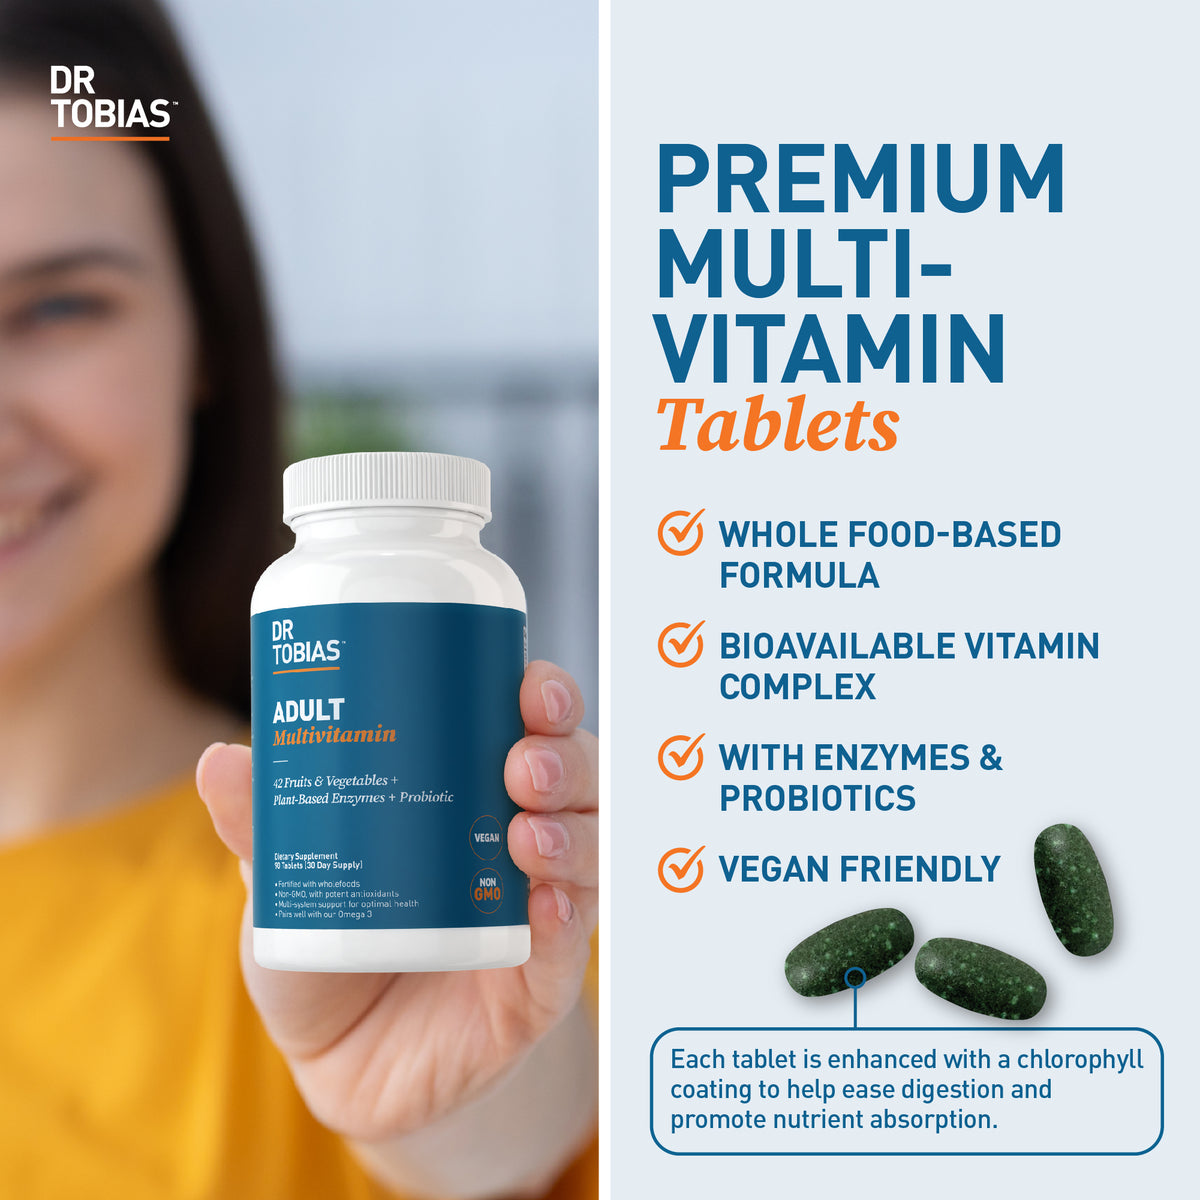 Dr Tobias vitamins made in FDA registered facility, best vitamin for women